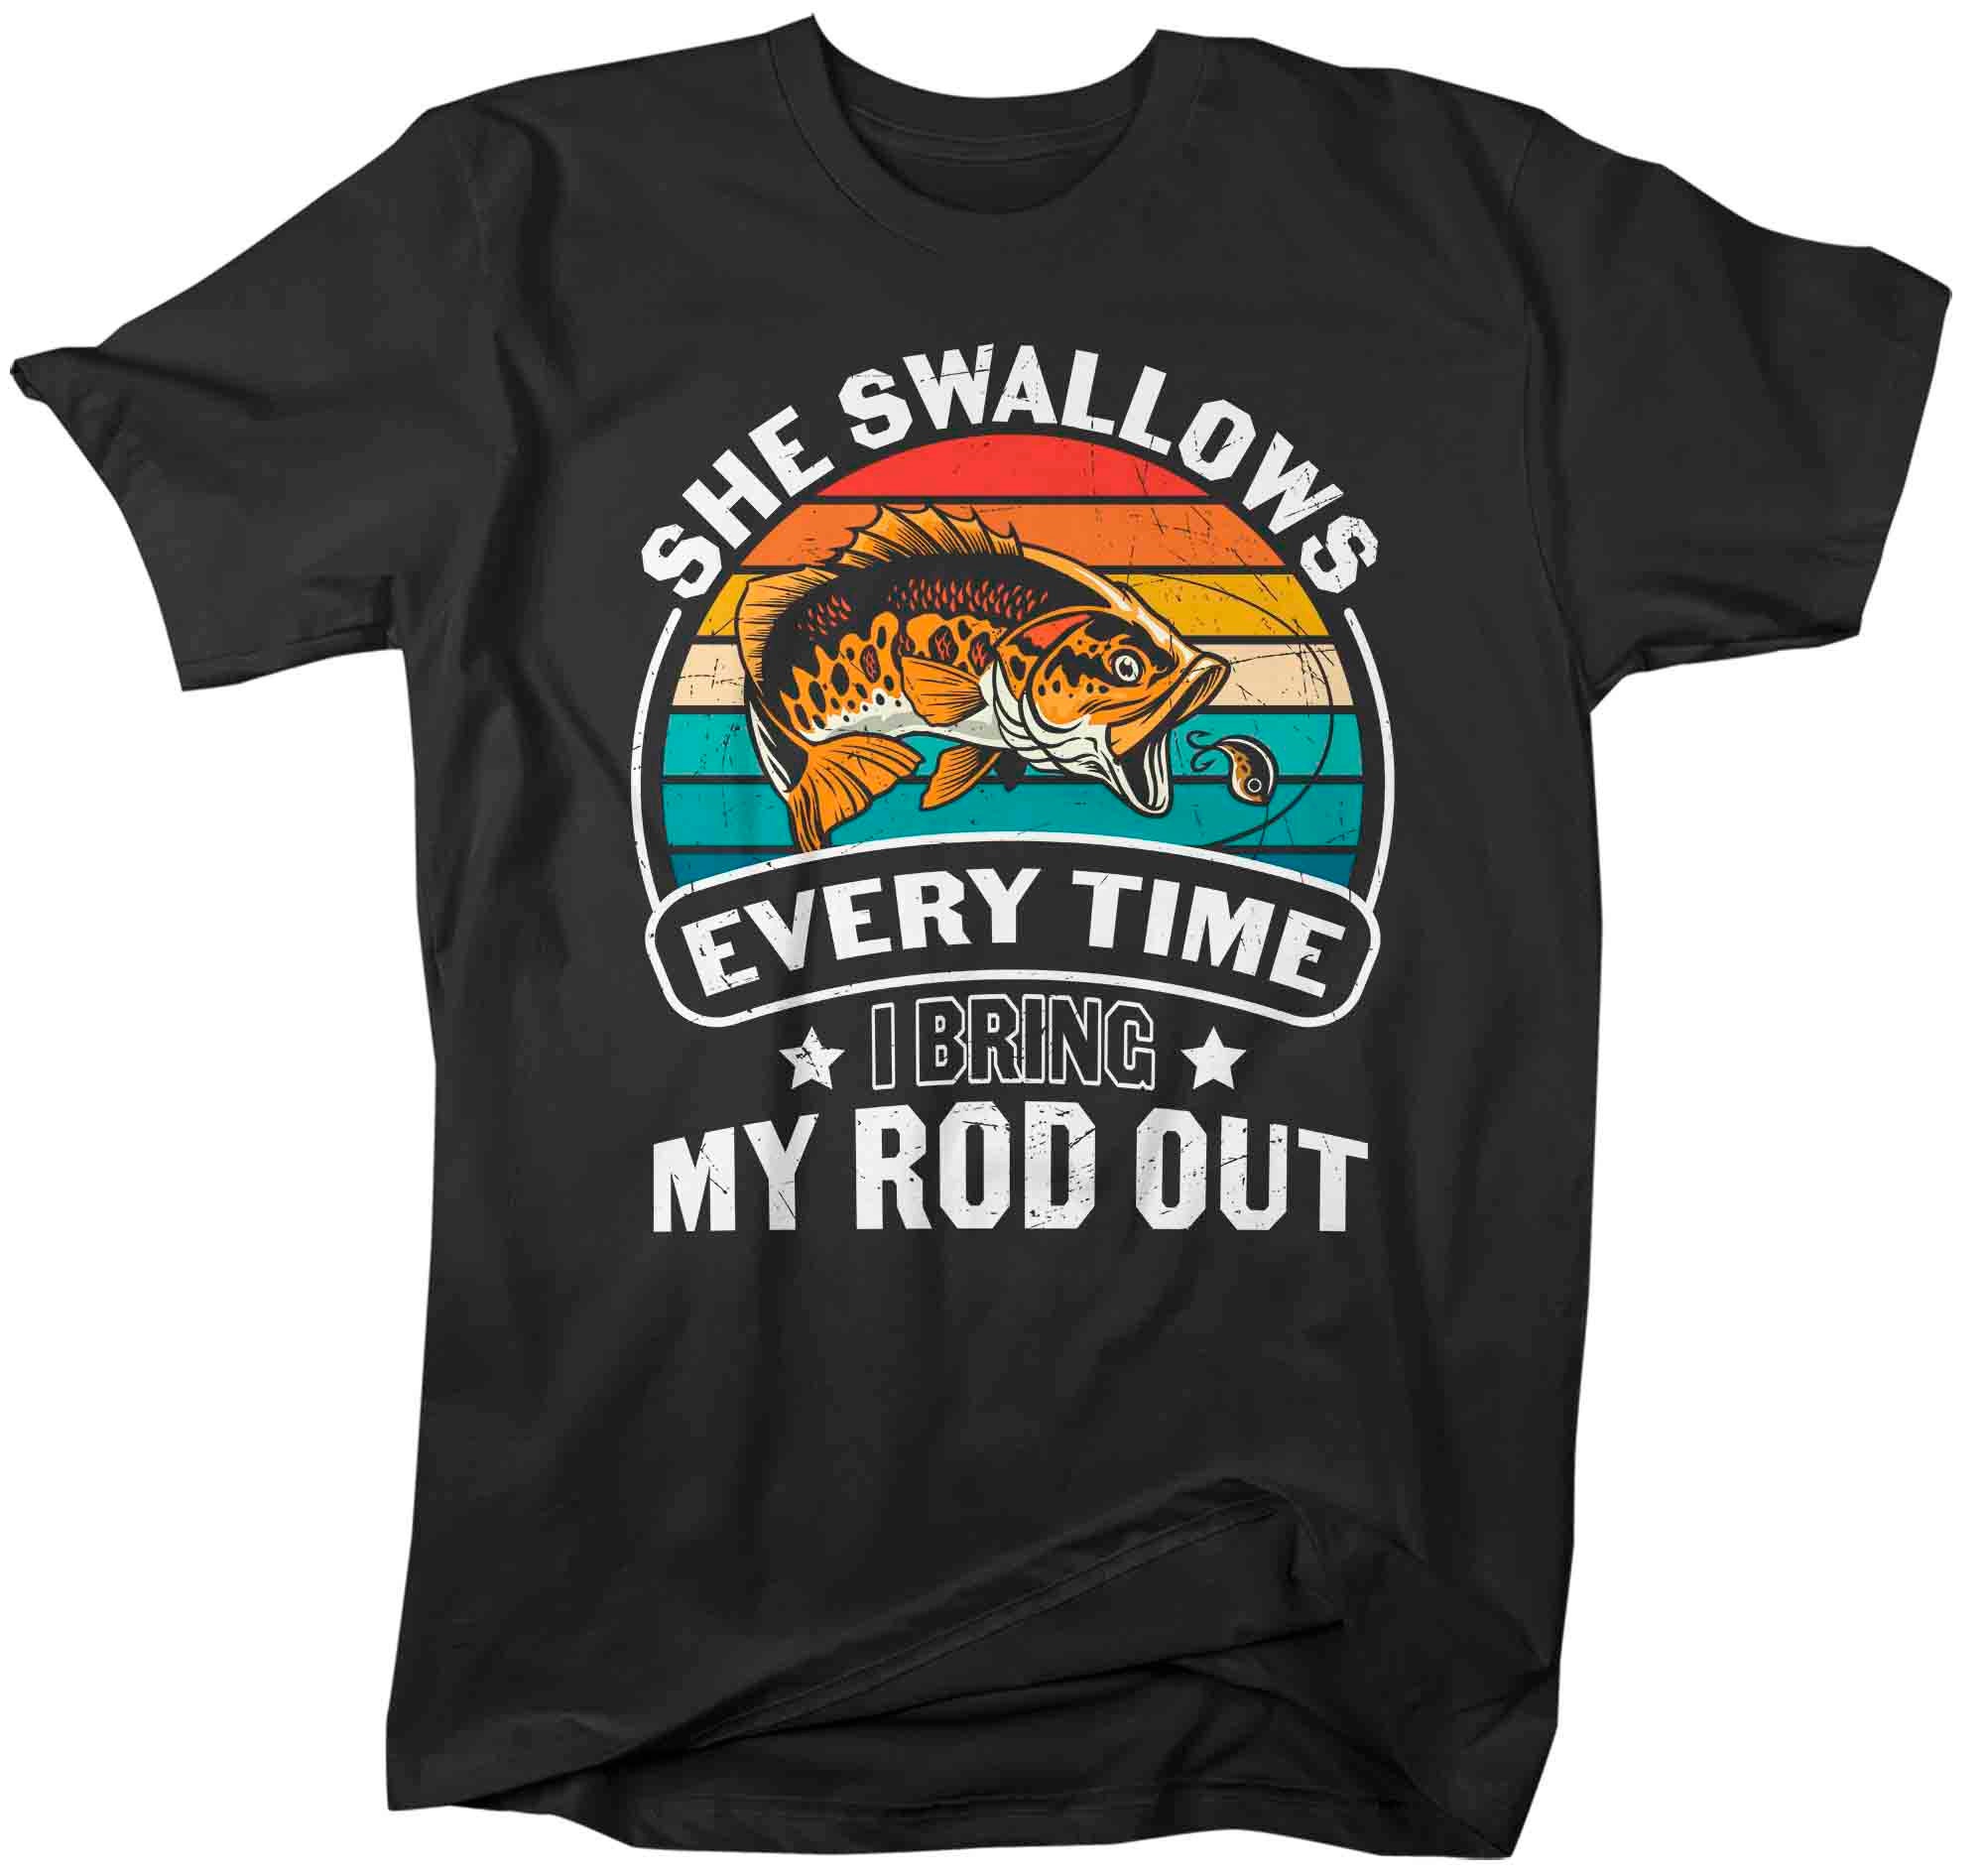 Play With My Rod & Swallow Funny Dirty Adult Fishing Pun Long Sleeve T-Shirt